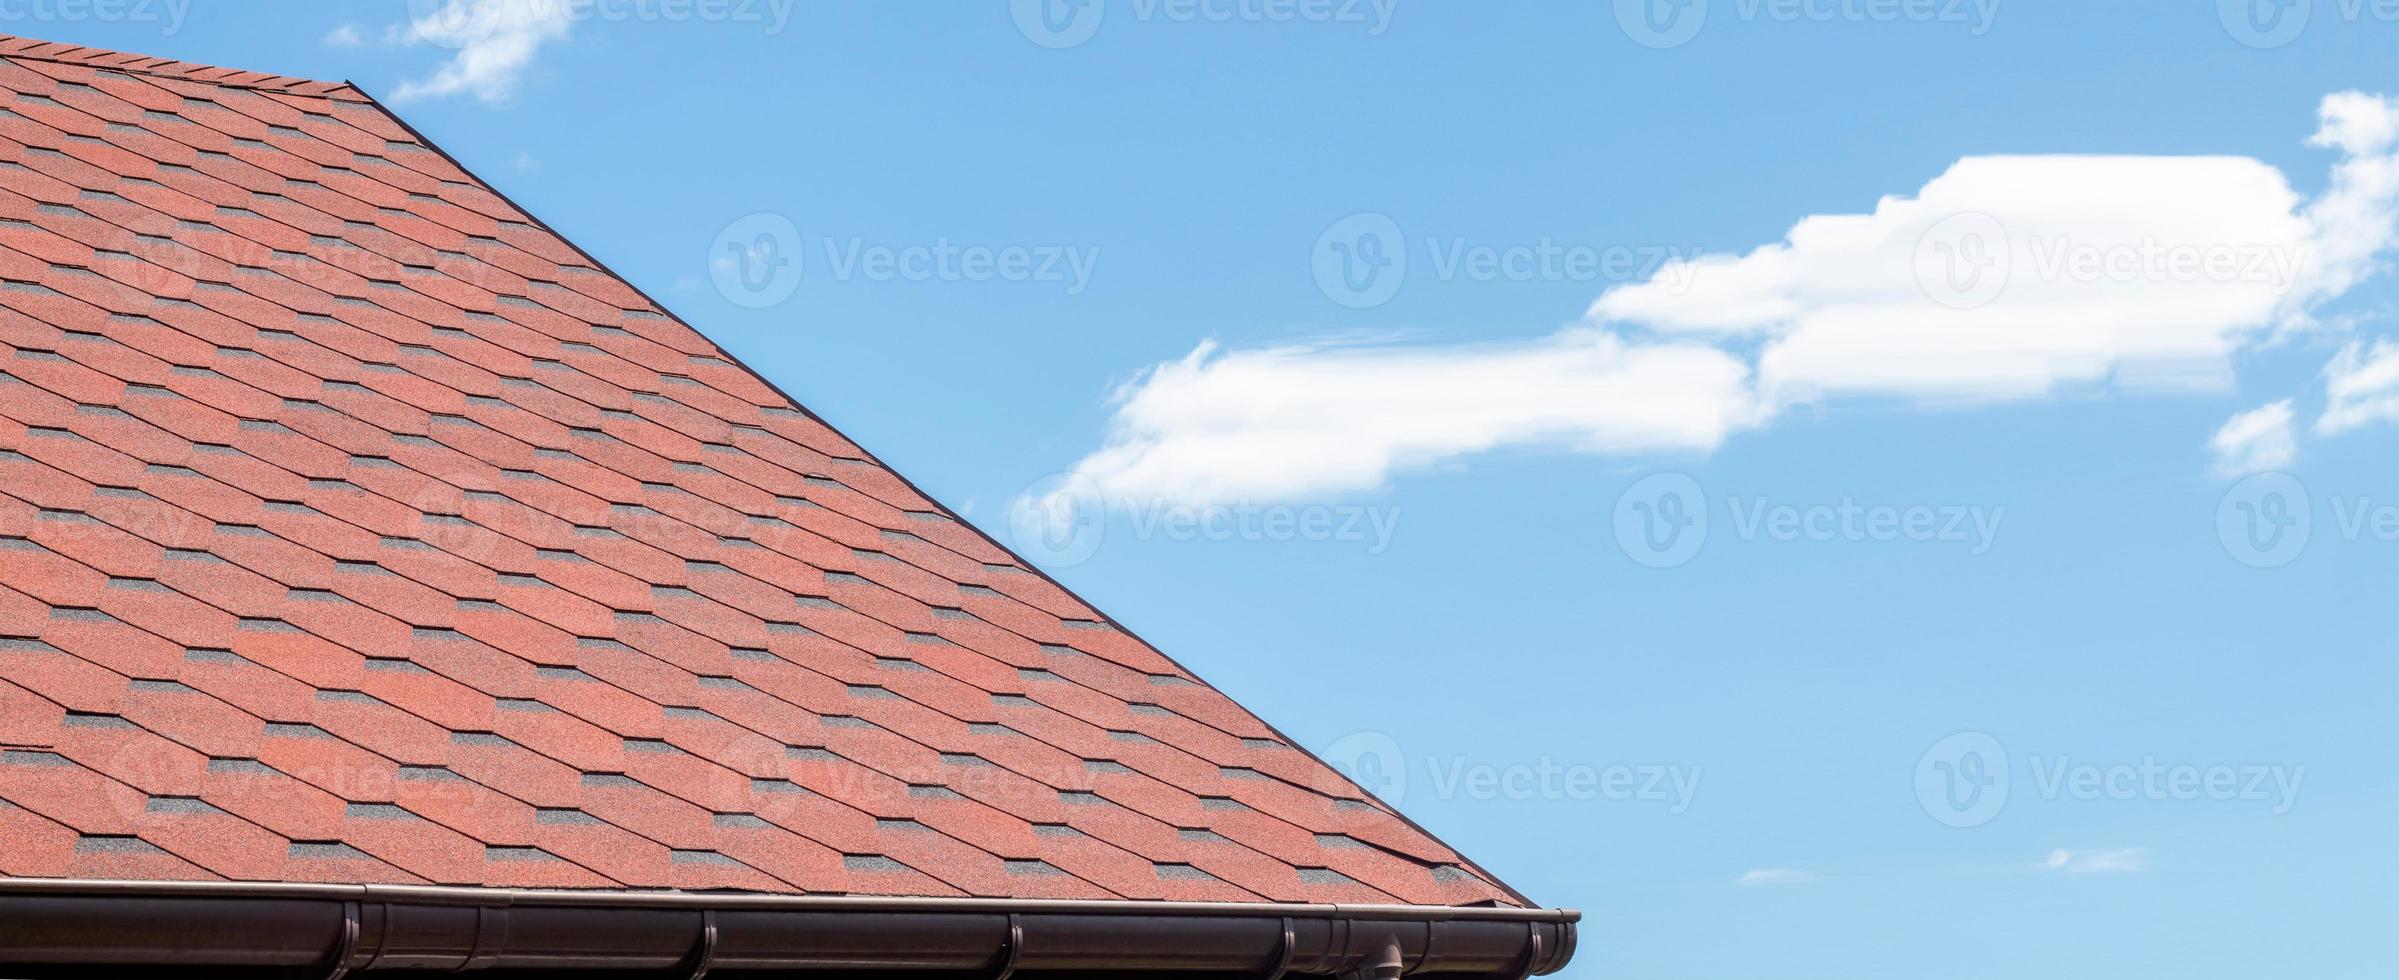 New roof with red shingles against the blue sky. Tiles on the roof of the house. Use to advertise roof fabrication and maintenance. Spotted texture. Affordable roofing. Banner with copy space. photo